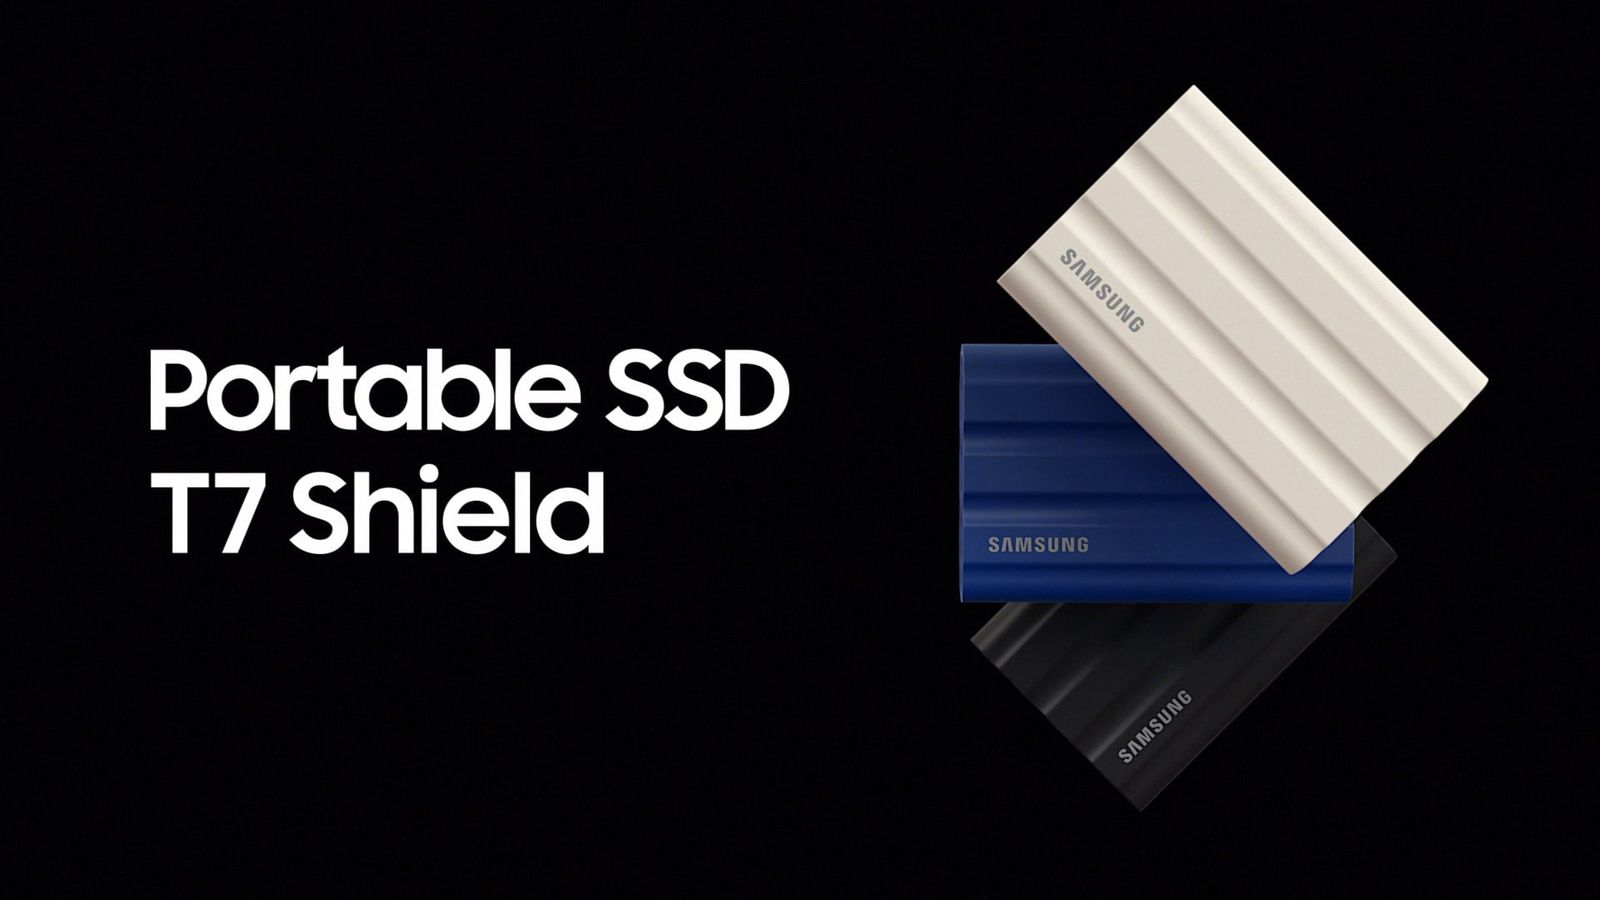 Samsung Introduces Portable T7 Shield Water and Shock Resistant SSD Up to 2TB